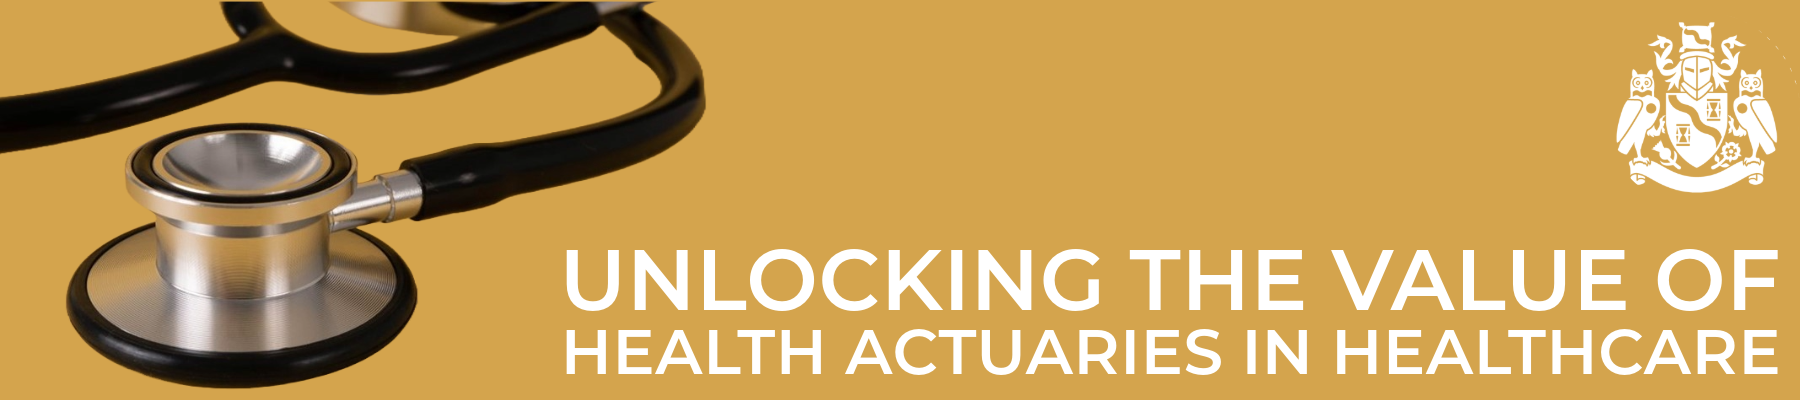 Unlocking the value of health actuaries in healthcare